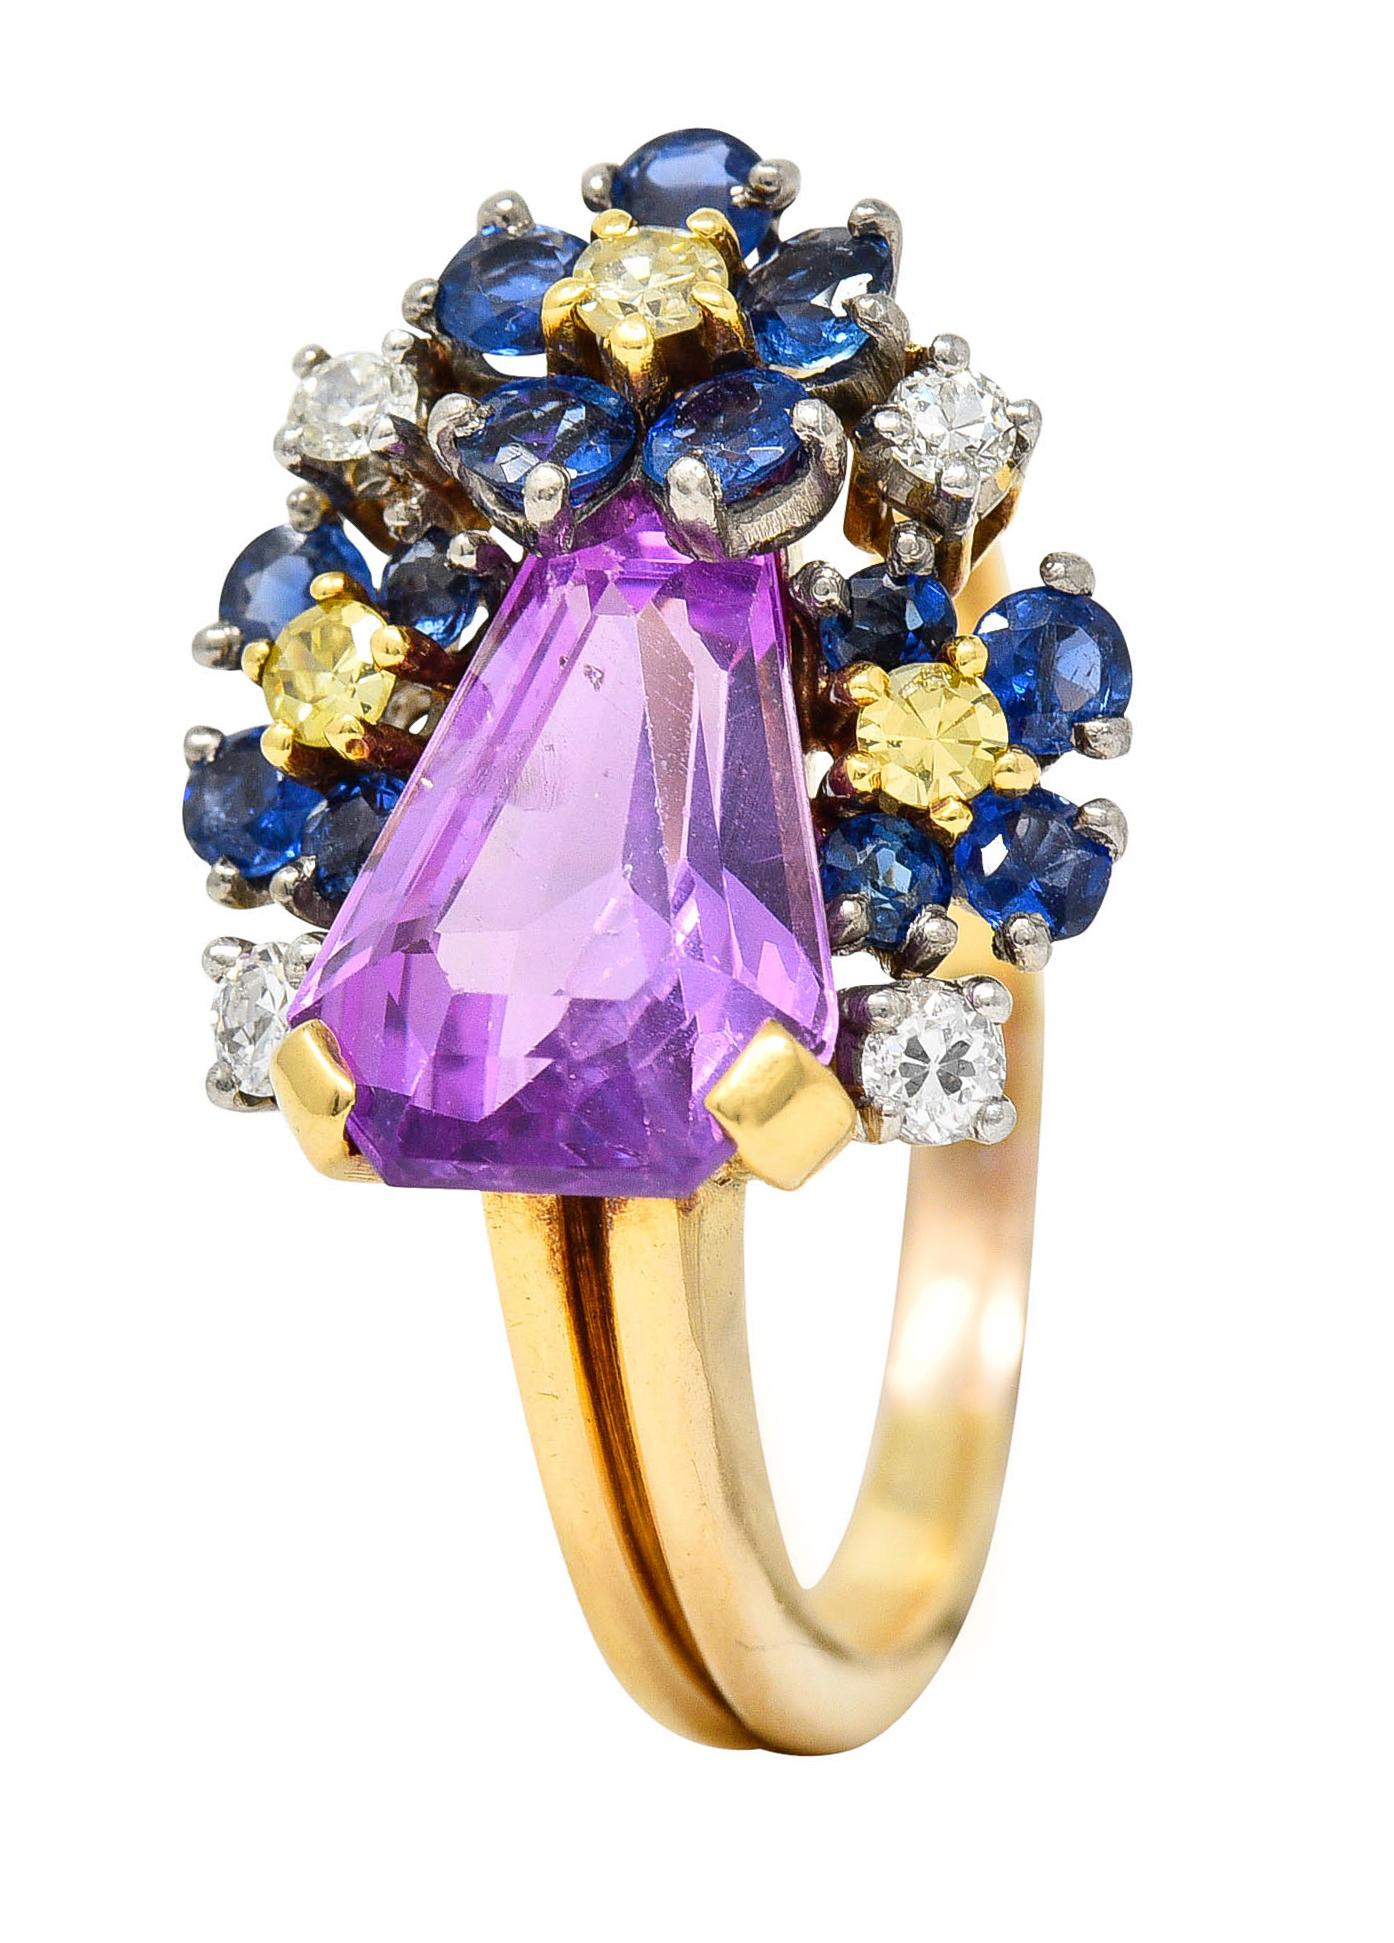 Asymmetrical cluster ring features a shield cut lavender sapphire

Medium light pinkish purple in color while weighing approximately 3.40 carats

Surrounded by florals comprised of royal blue sapphires weighing in total approximately 0.56